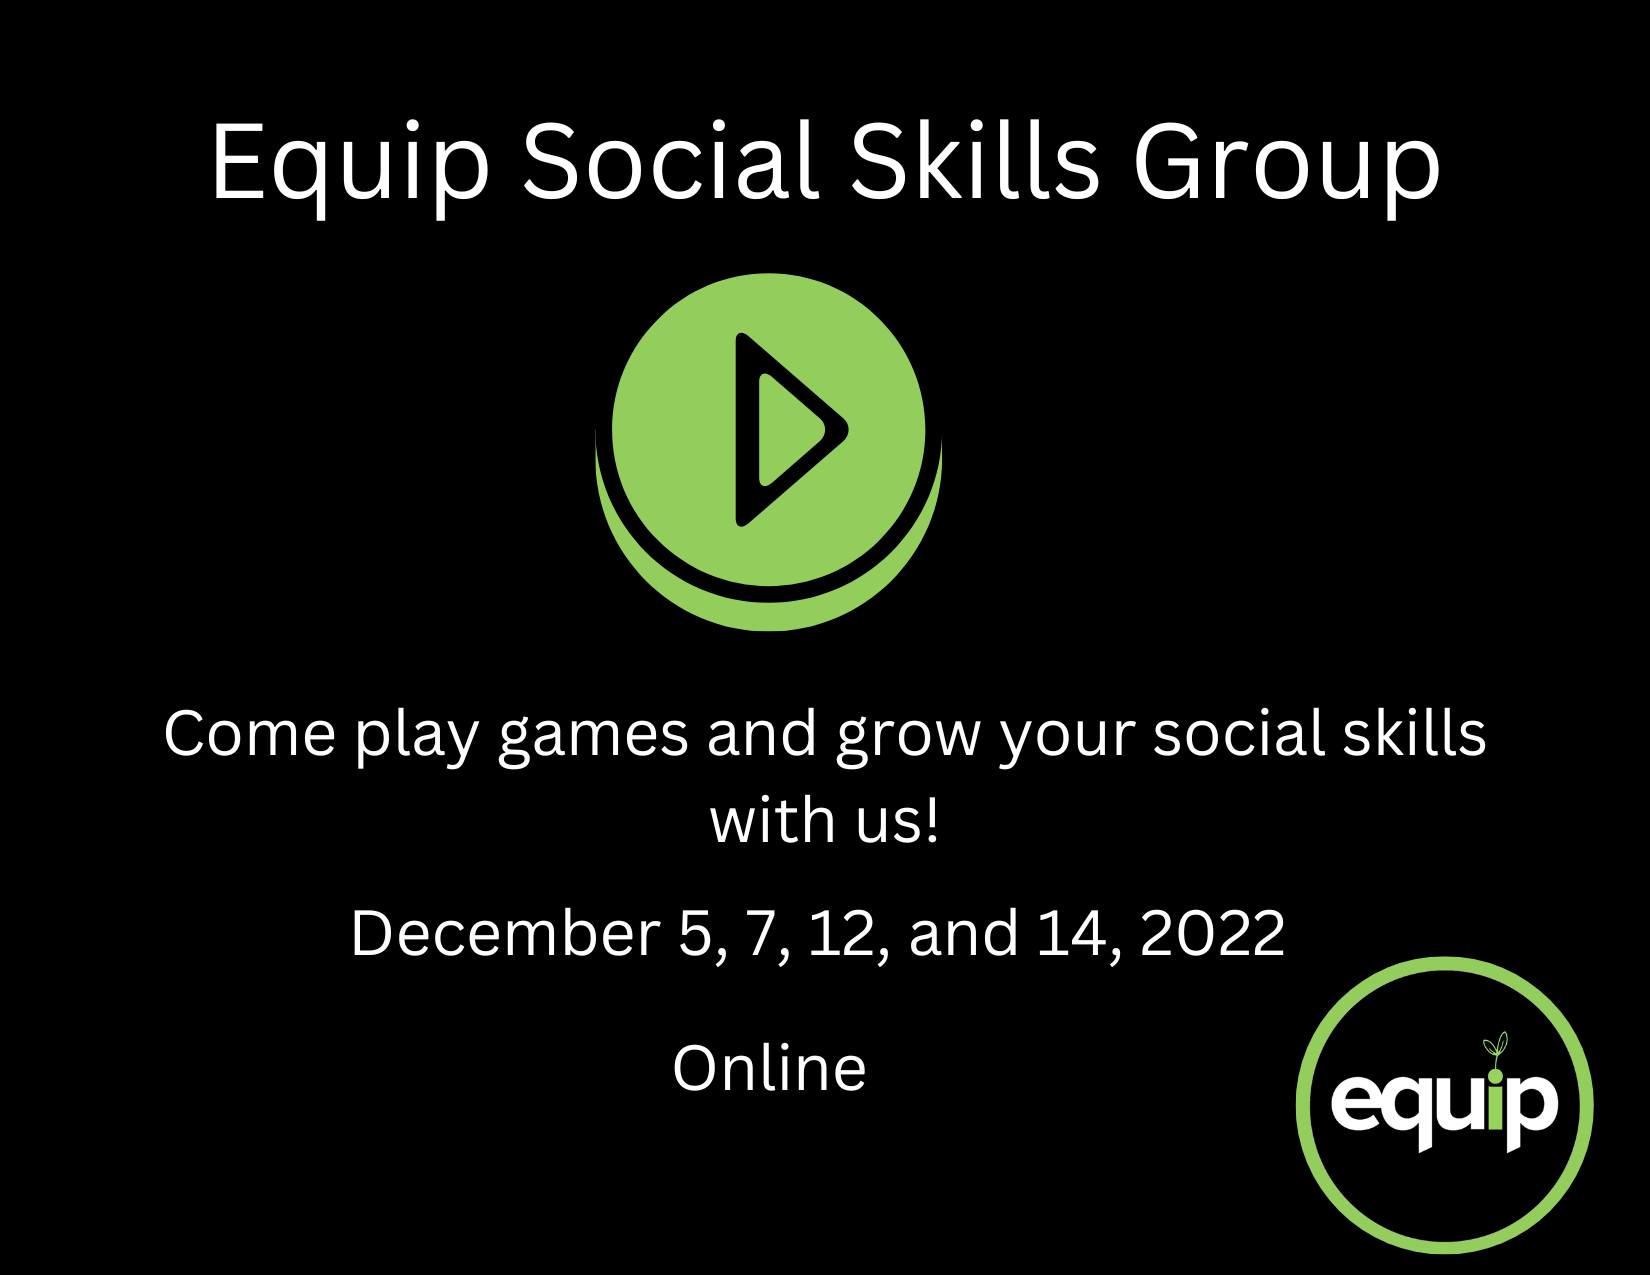 The Equip Social Skills Group Series designed to help youth with disabilities build their social skills in a peer-to-peer setting. Our upcoming meetings will focus on having fun a nd learning how to improve our social skills while playing games! The group will meet virtually 4 times on December 5th, 7th, 12th, and 14th, 2022, from 4:00 PM to 5:00 PM.